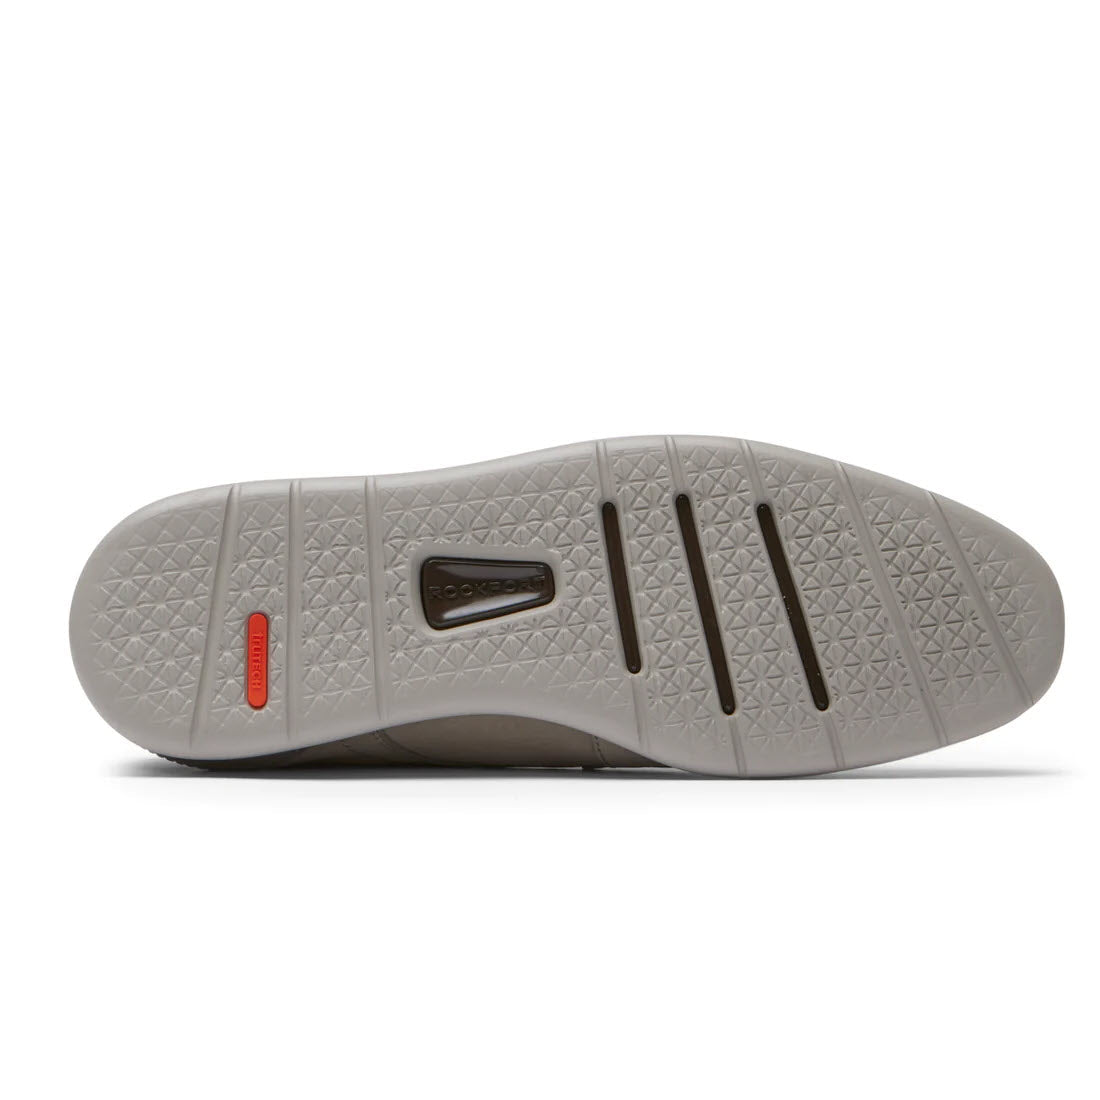 Sole of a modern Rockport shoe featuring a gray rubber tread with a textured diamond pattern and a rectangular logo embedded near the midsole.